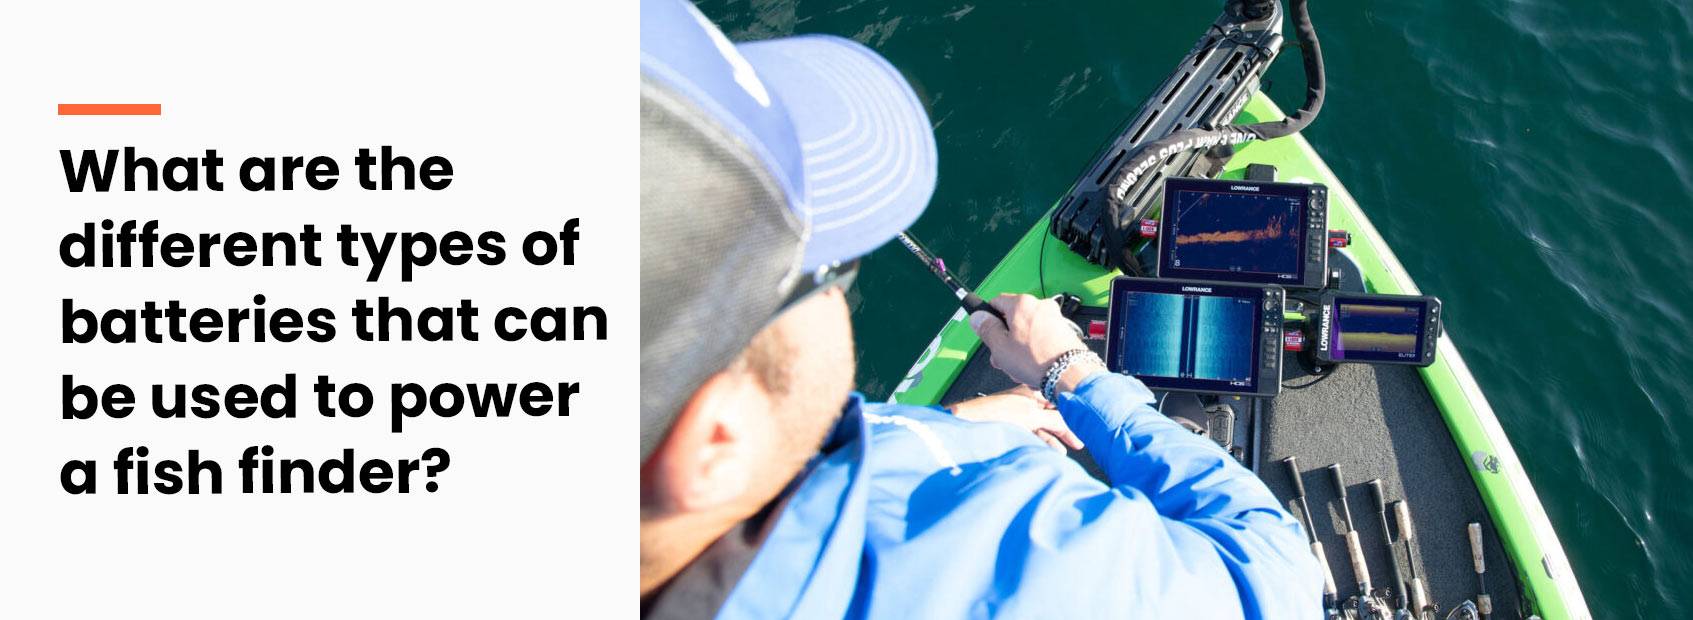 What are the different types of batteries that can be used to power a fish finder?